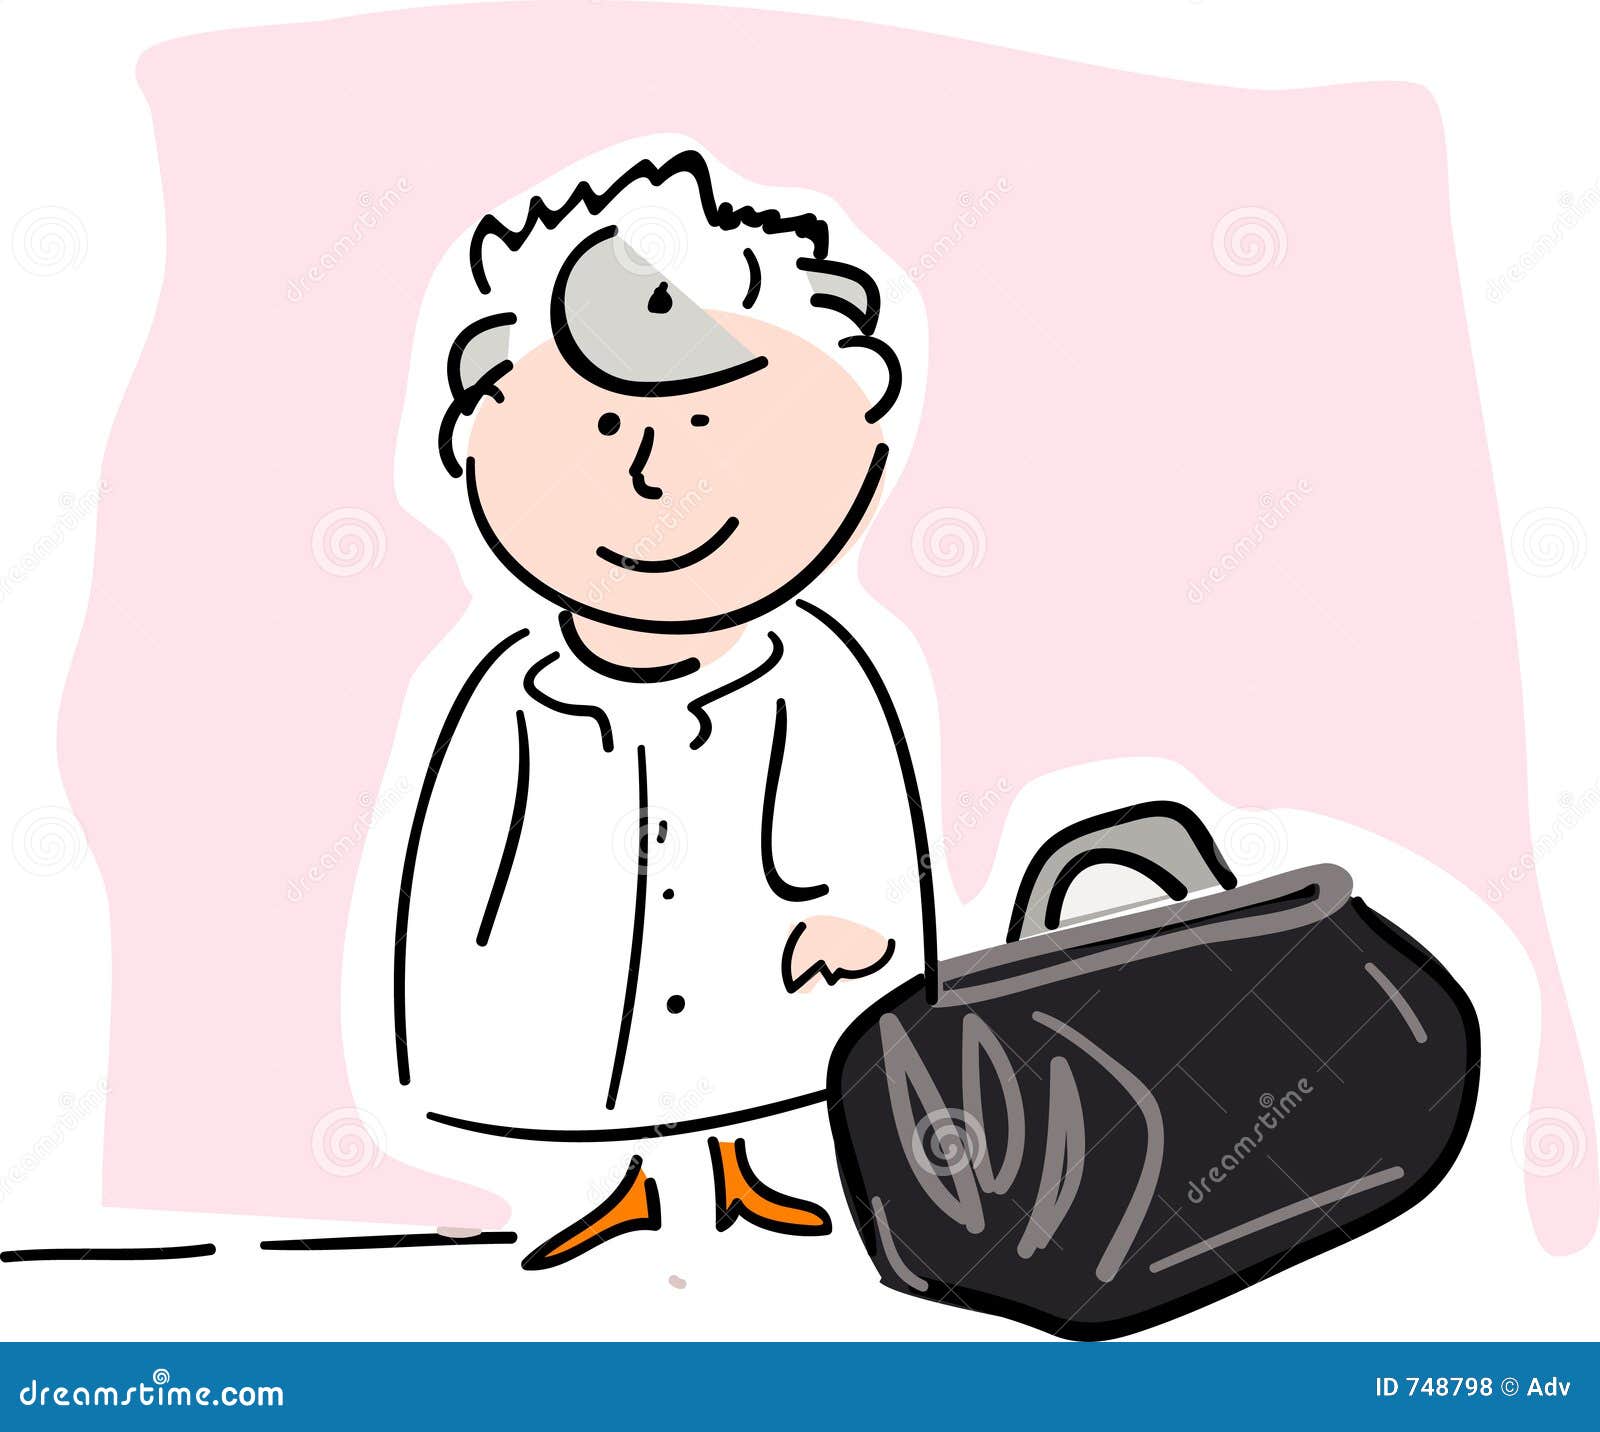 clipart doctor bag - photo #15